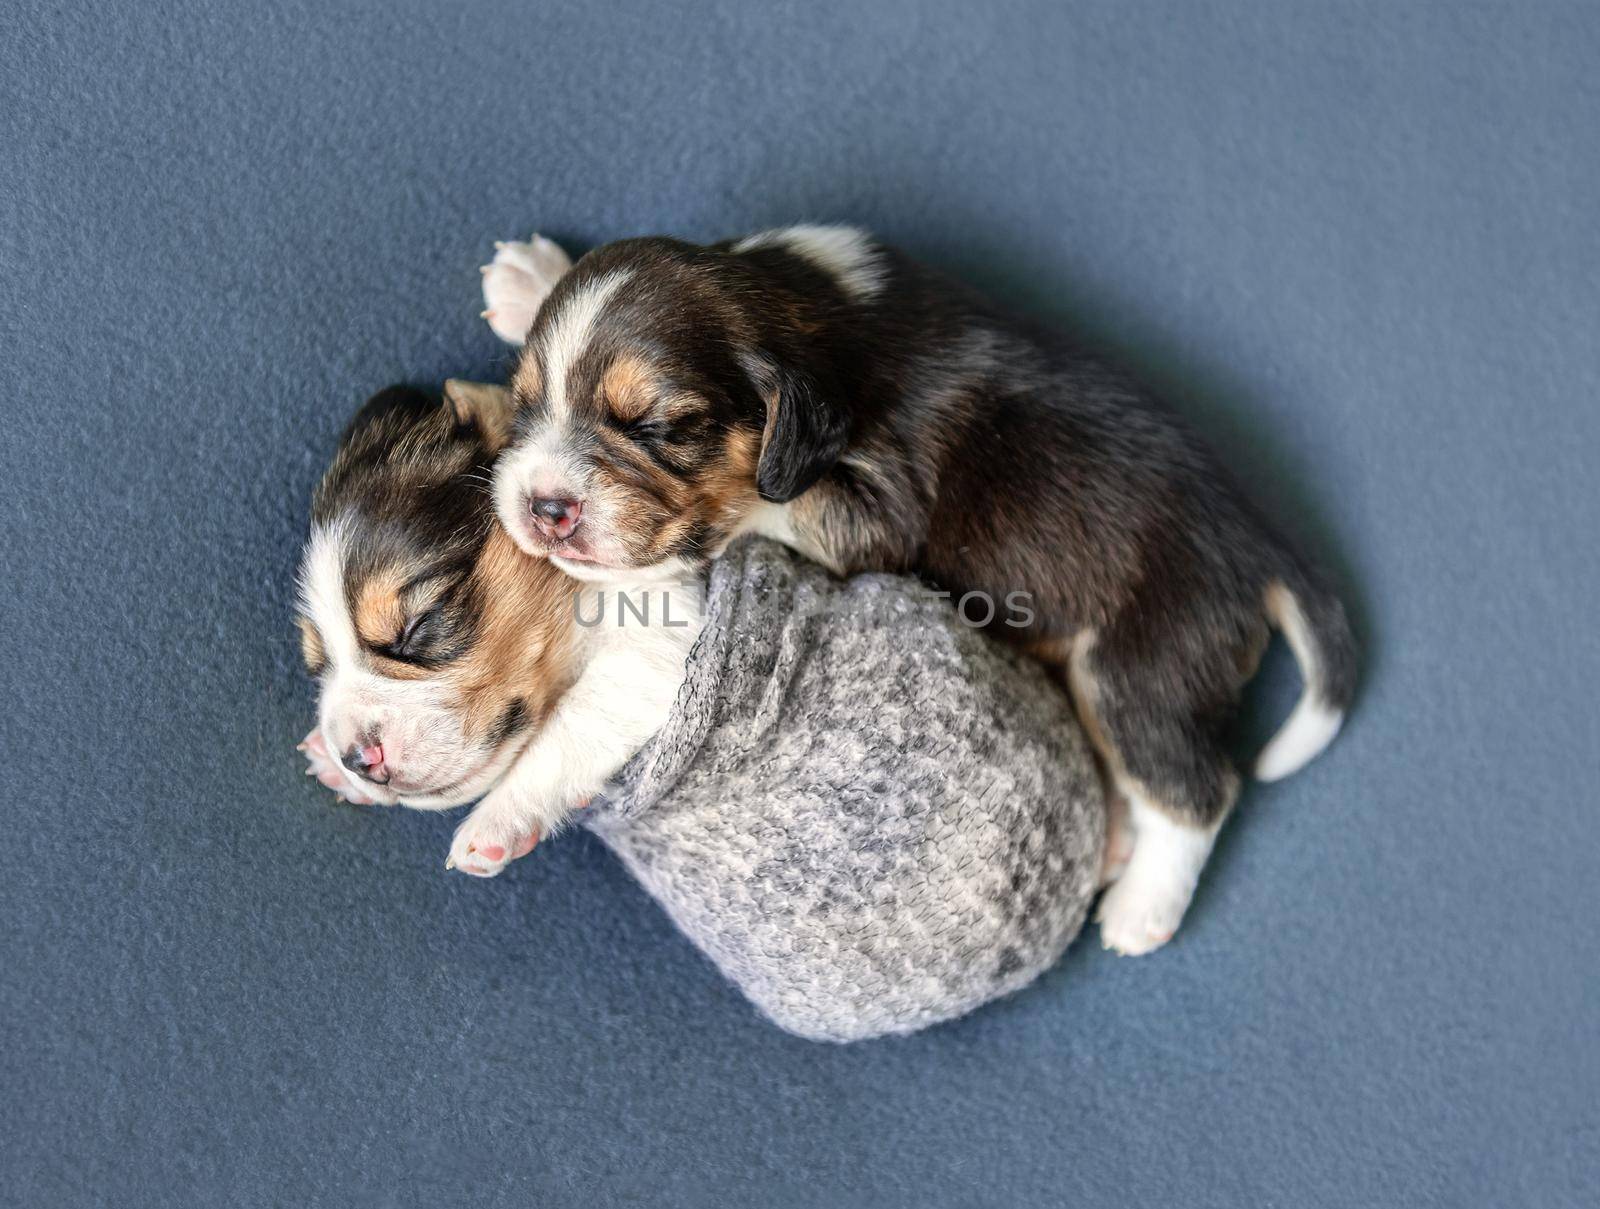 Pair of little sleeping beagle puppies, laying on blue carpet